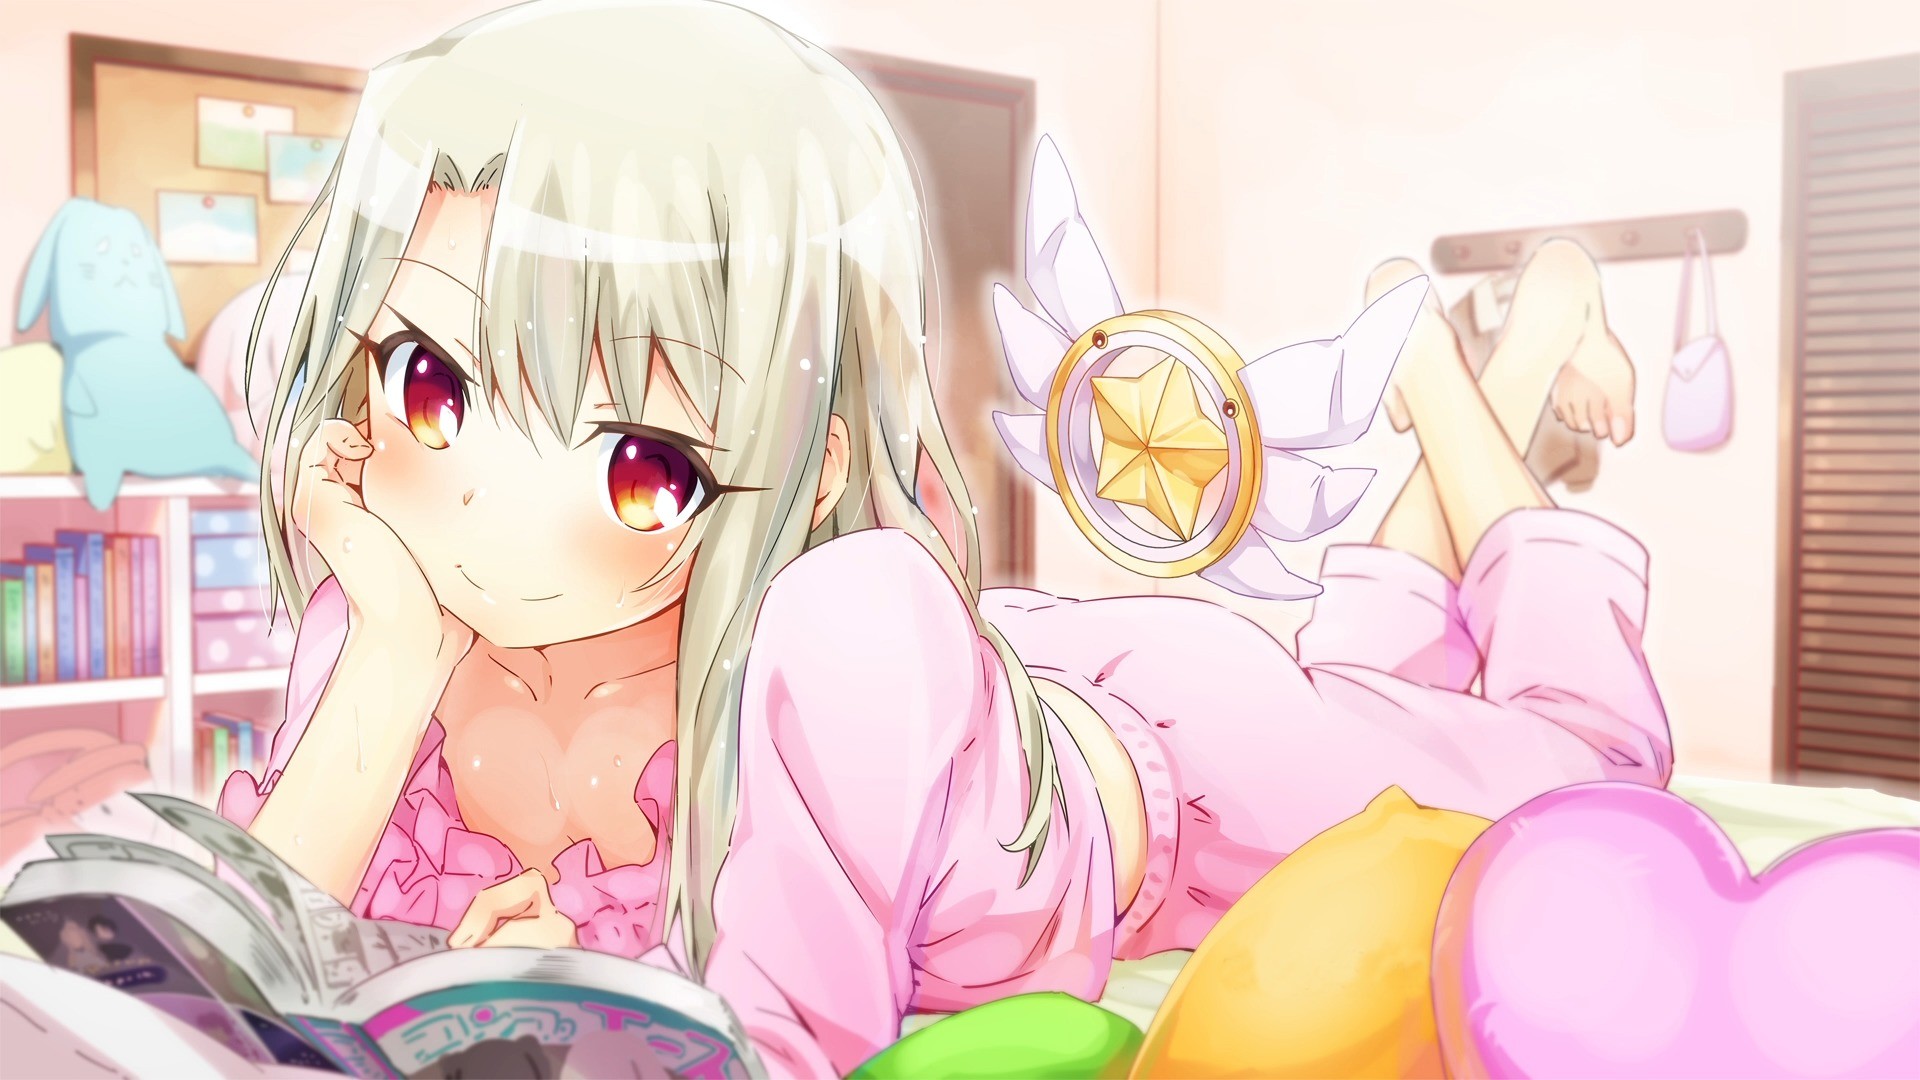 Anime 1920x1080 anime Fate/kaleid liner Prisma Illya Illyasviel von Einzbern anime girls barefoot pink pyjamas white hair red eyes in bed lying on front feet in the air pyjamas smiling reading room Fate series bun150 women indoors indoors looking at viewer